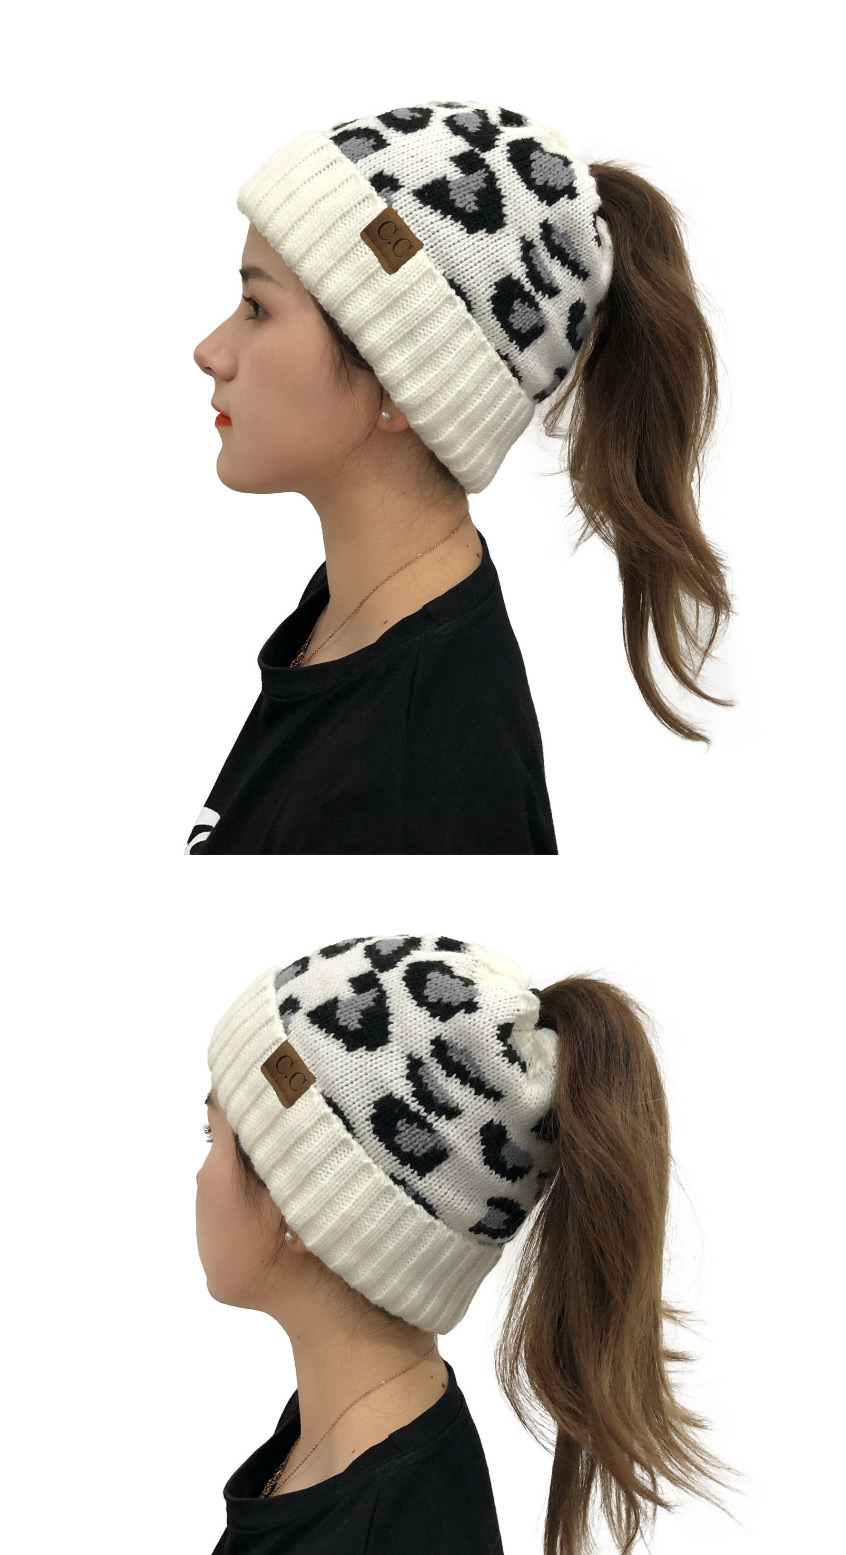 Fashion Dark Gray Leopard Print Ponytail Knitted Beanie With Curled Edges,Knitting Wool Hats